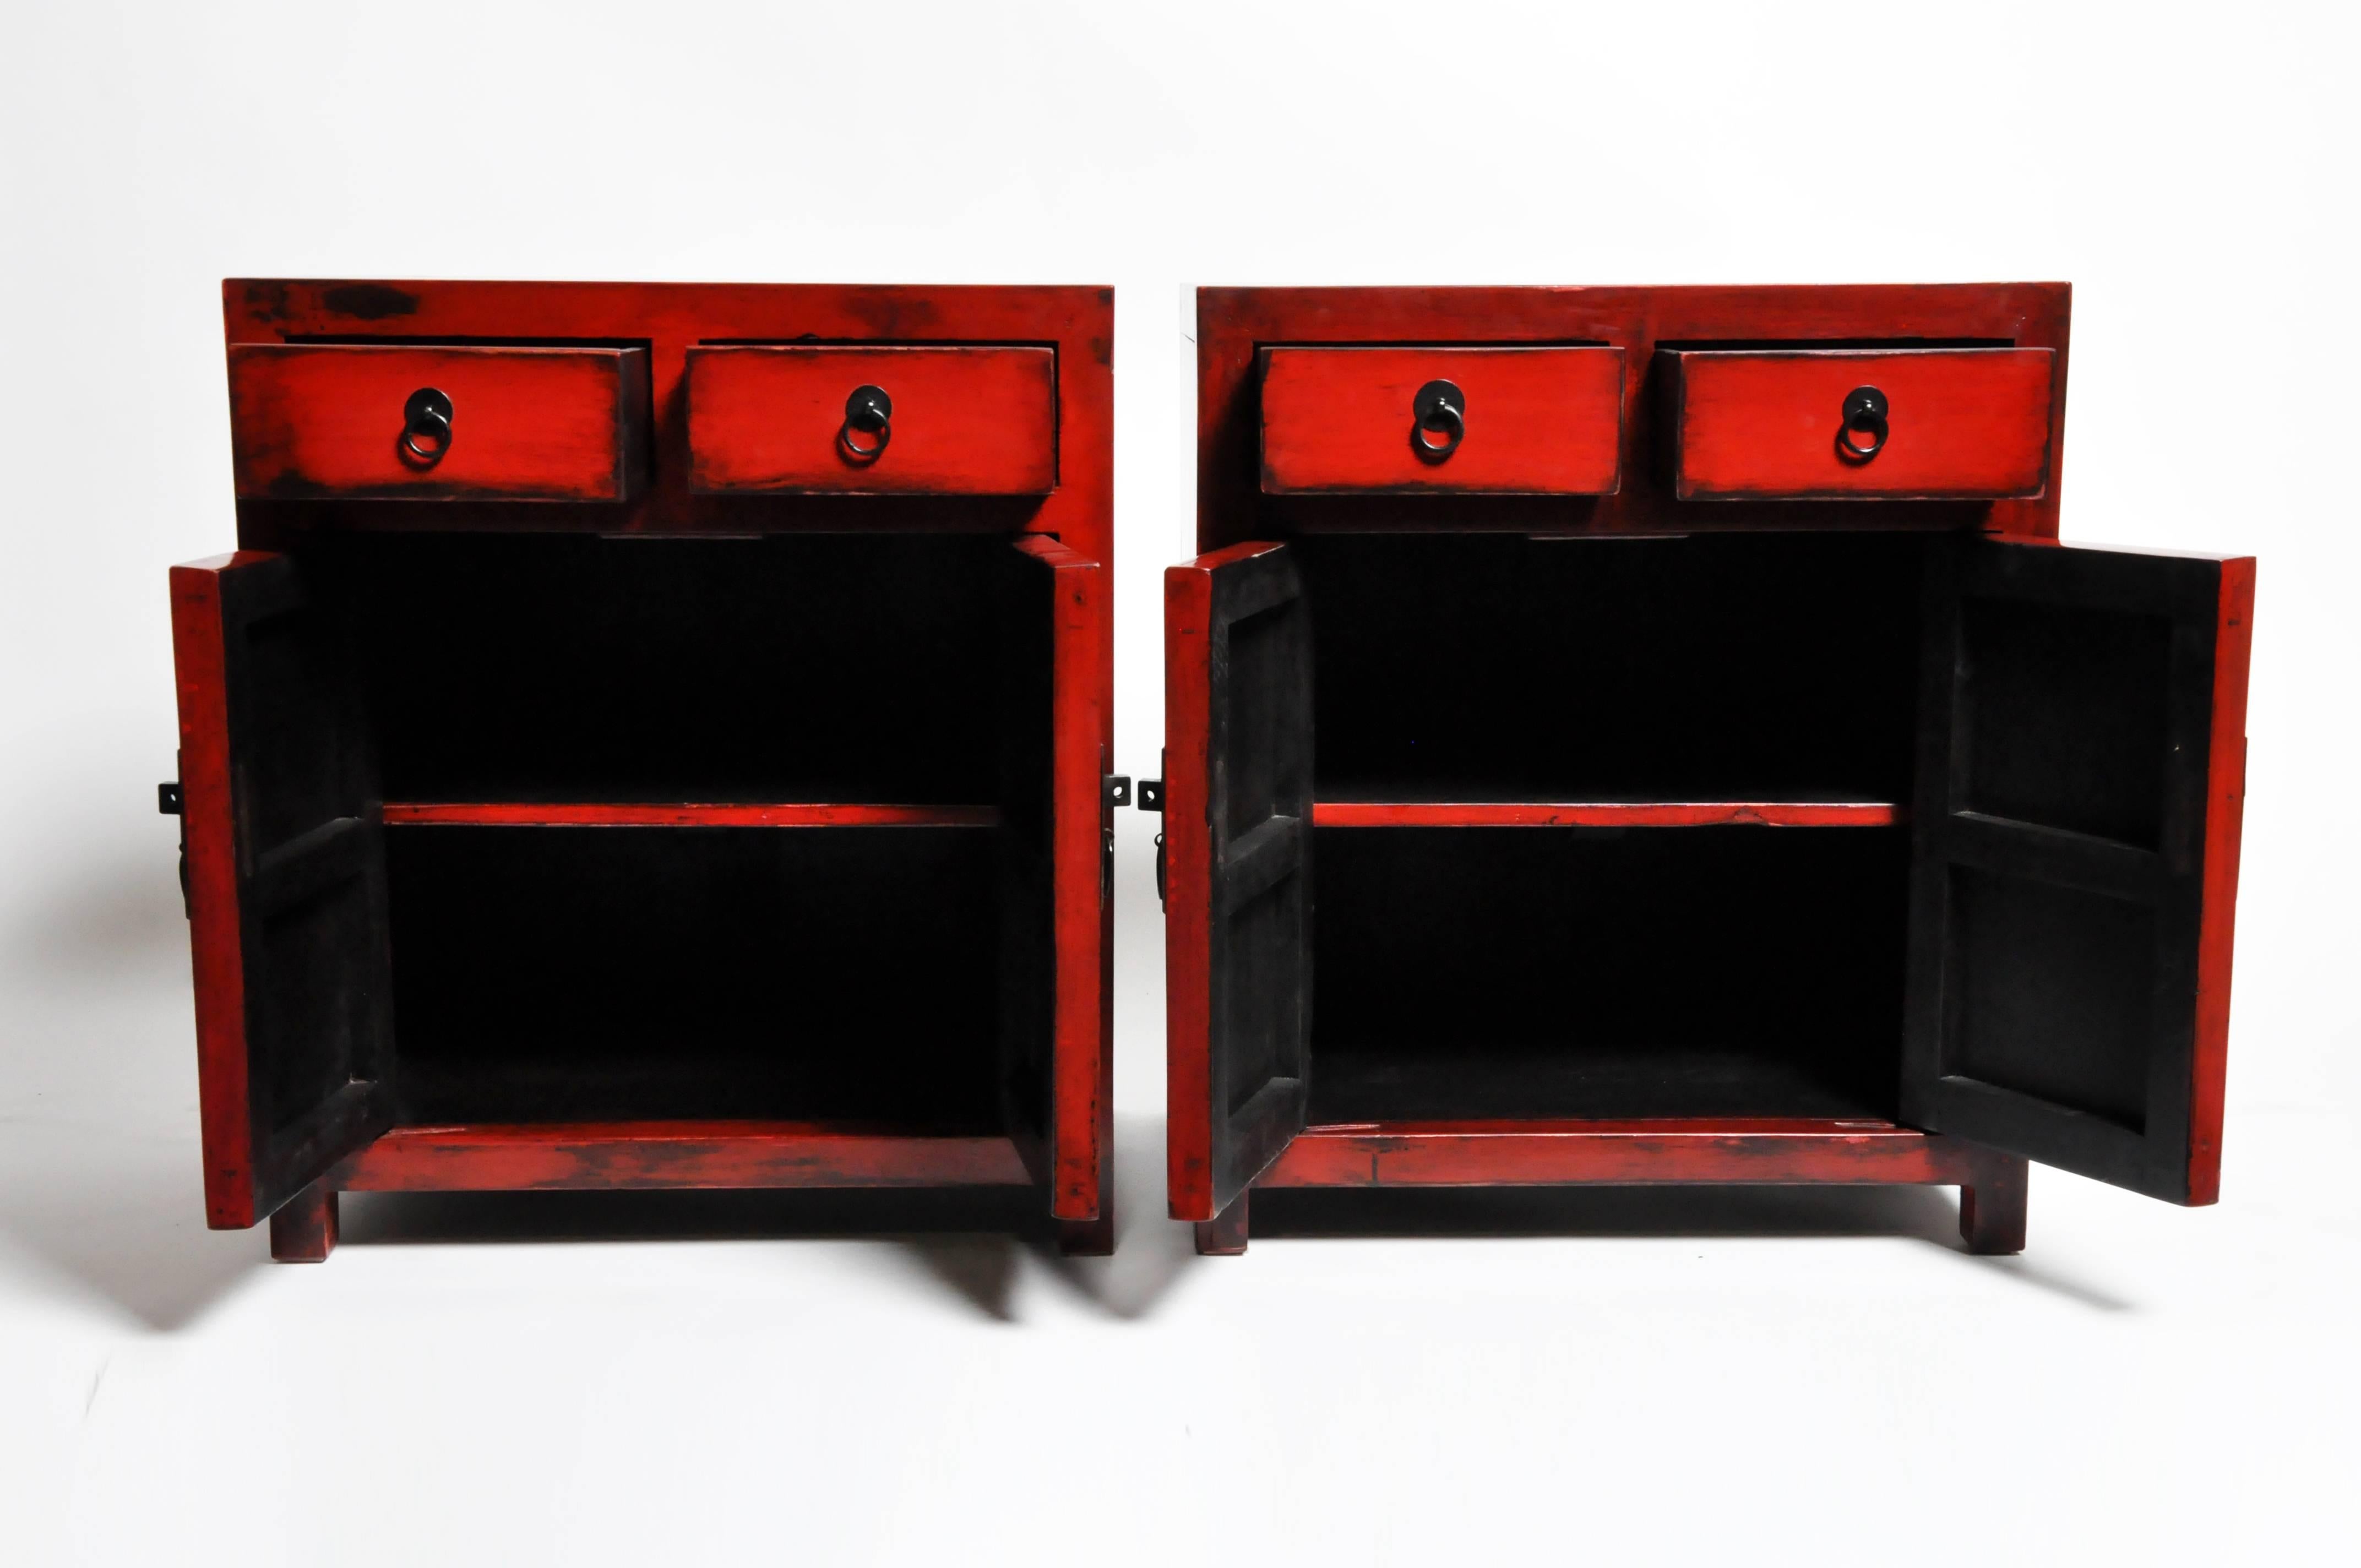 Add a pop of red to any room with this pair of red lacquered side chests from Zhejiang, China. Made from reclaimed elm wood and lacquer the pair features mortise and tenon joinery, two drawers, and a shelf each. You can also customize a new one and